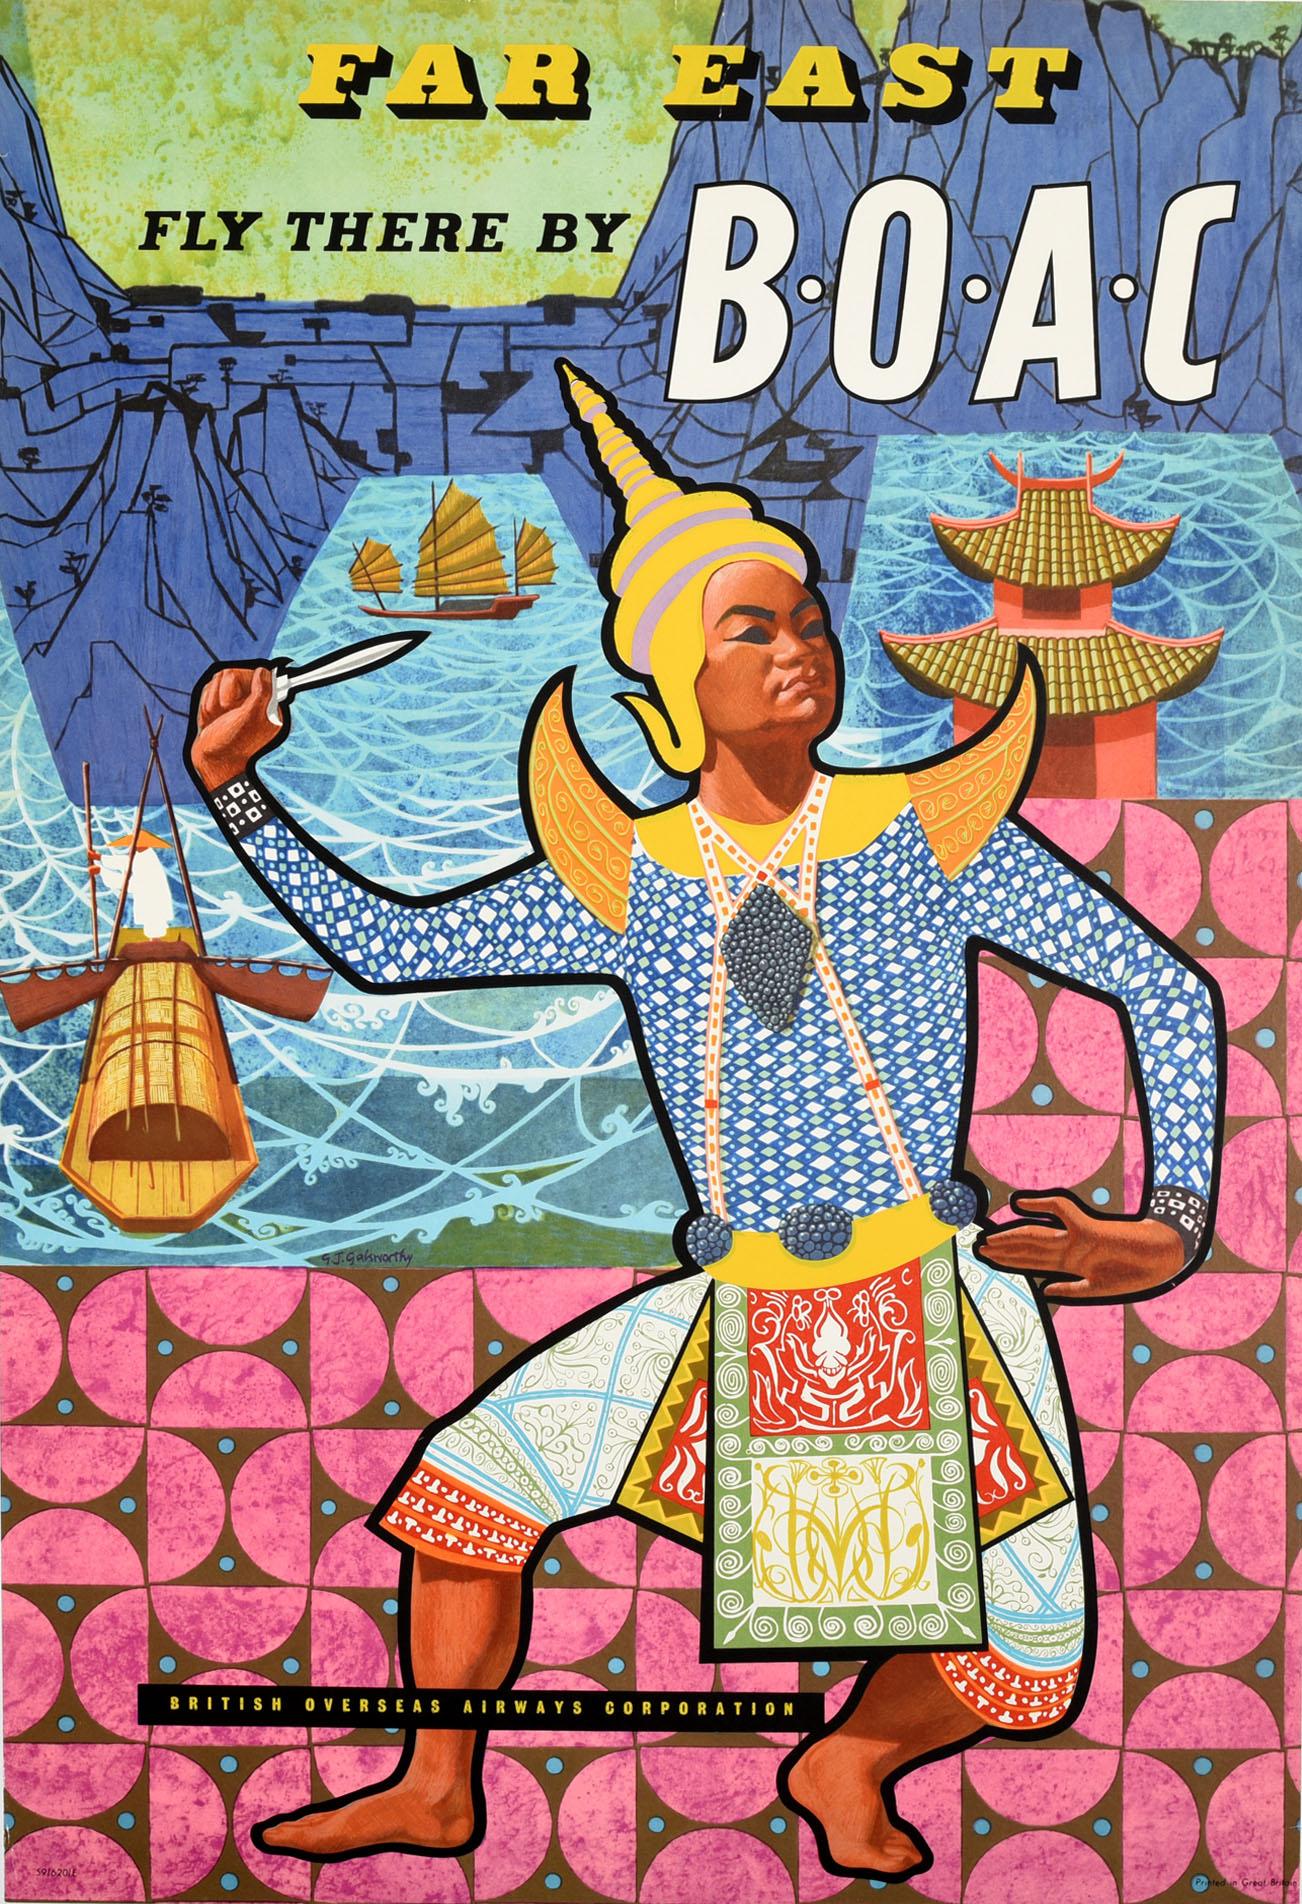 Original vintage travel poster advertising the Far East Fly there by BOAC British Overseas Airways Corporation featuring a colourful image of a traditional Thai dancer with mountains, a pagoda and wooden boats and a junk boat in full sail on the sea